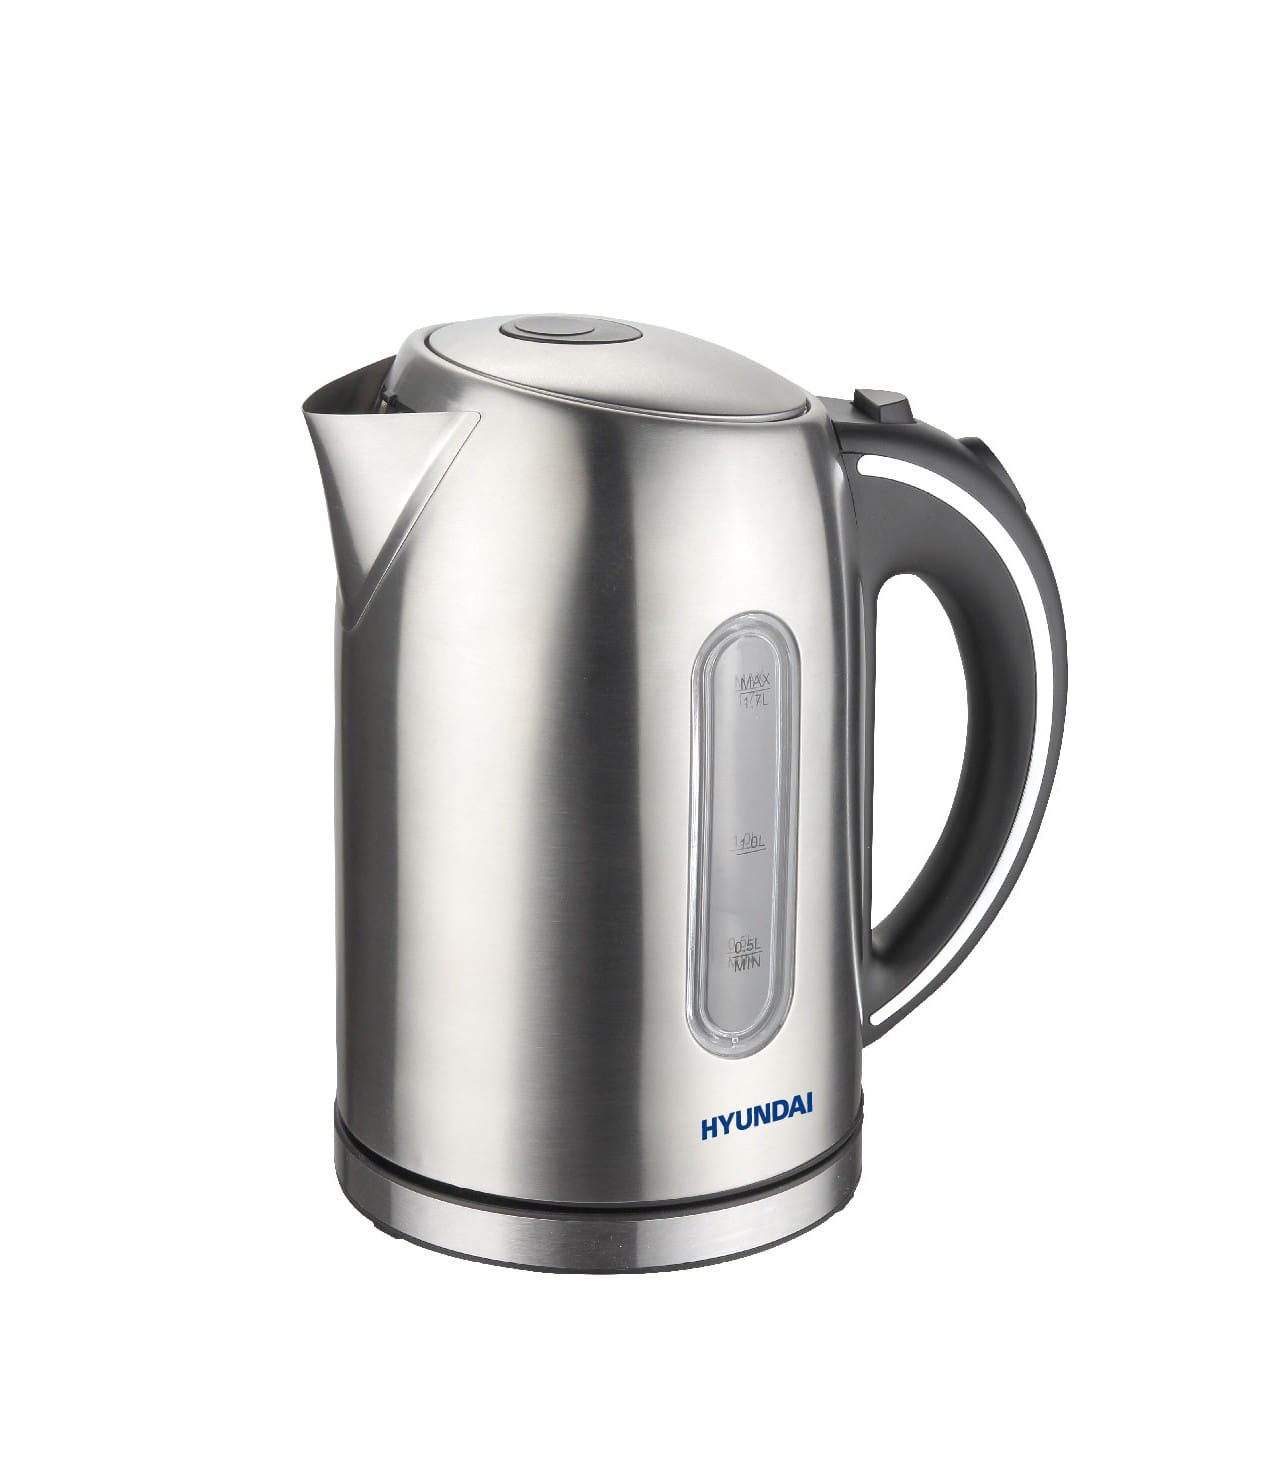 Hyundai 1.7L Stainless Steel Electric Kettle